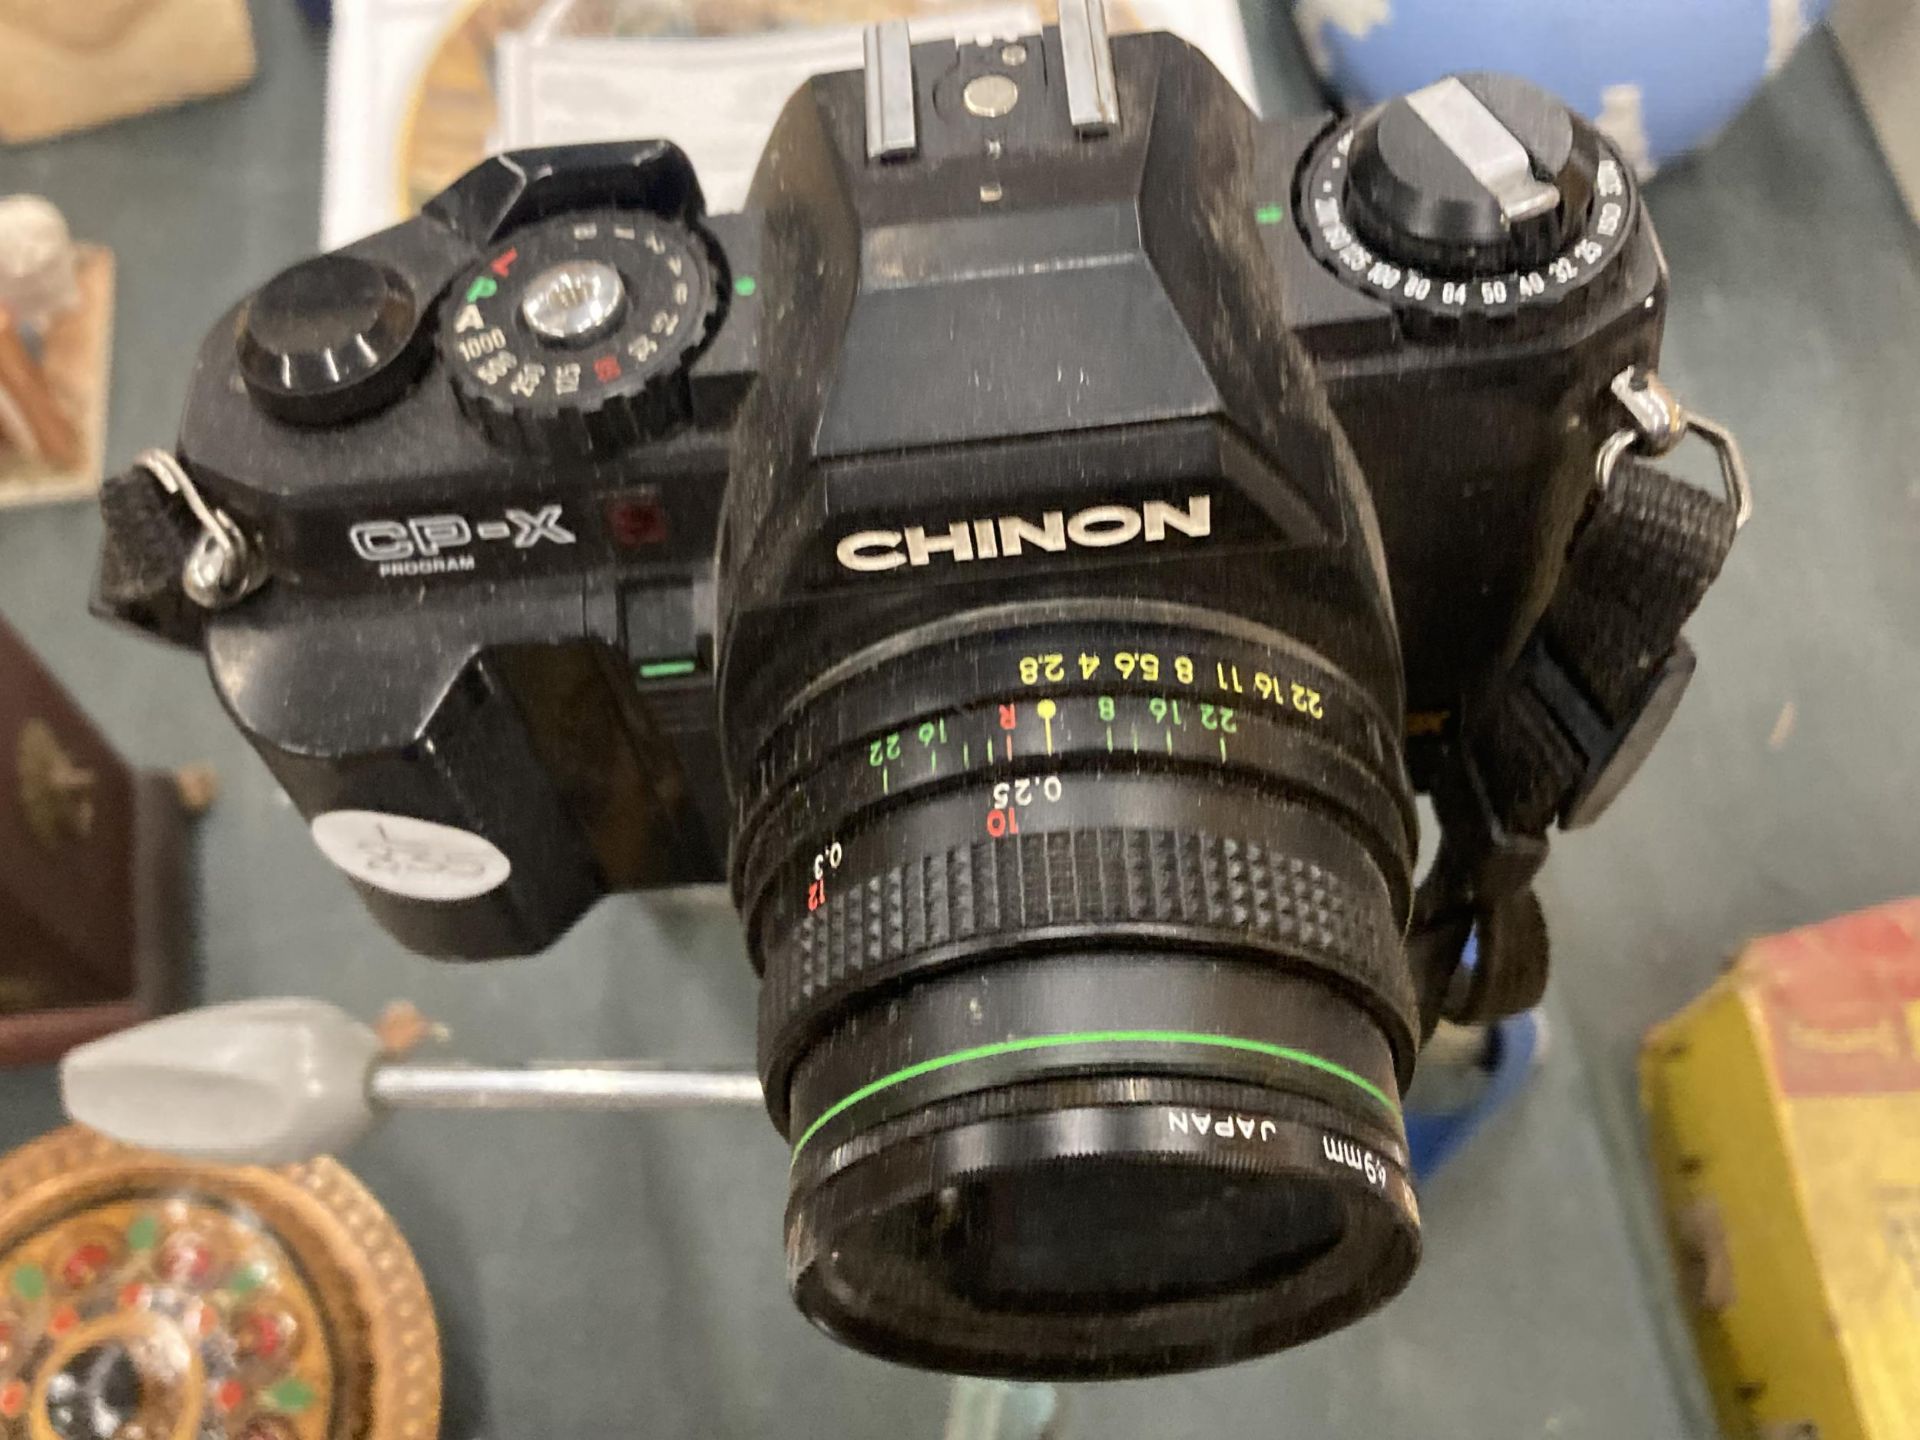 TWO VINTAGE CAMERAS TO INCLUDE A SIX-20 BROWNIE, CHINON CP-X, A SIGMA ZOOM LENS IN LEATHER CASE - Image 4 of 6